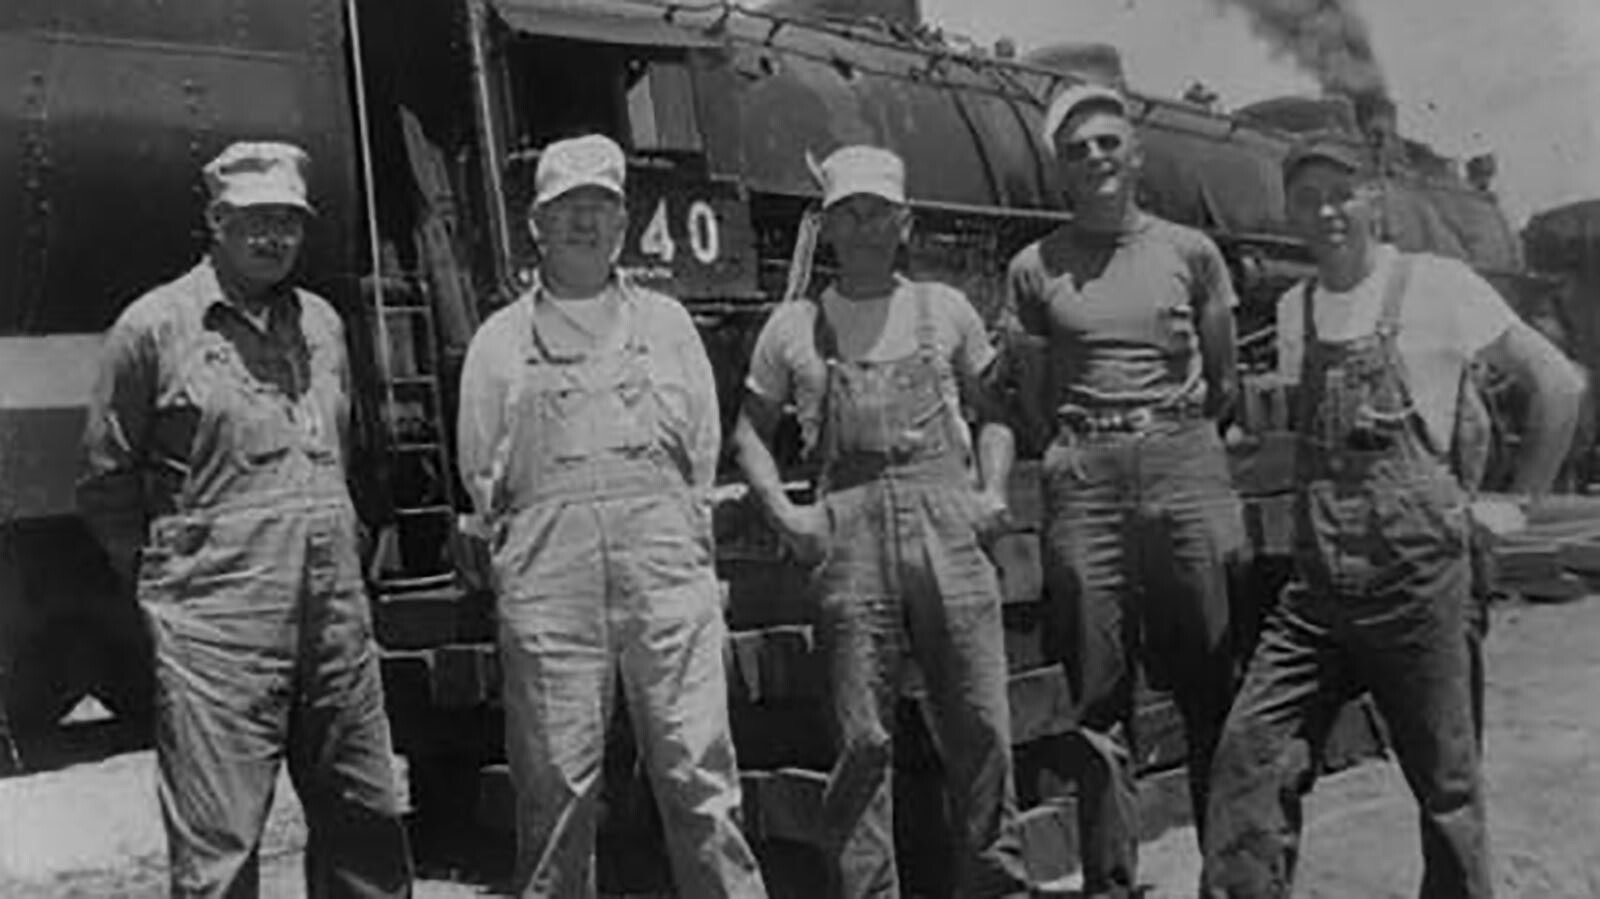 A train crew from the steam era pose outside their train.